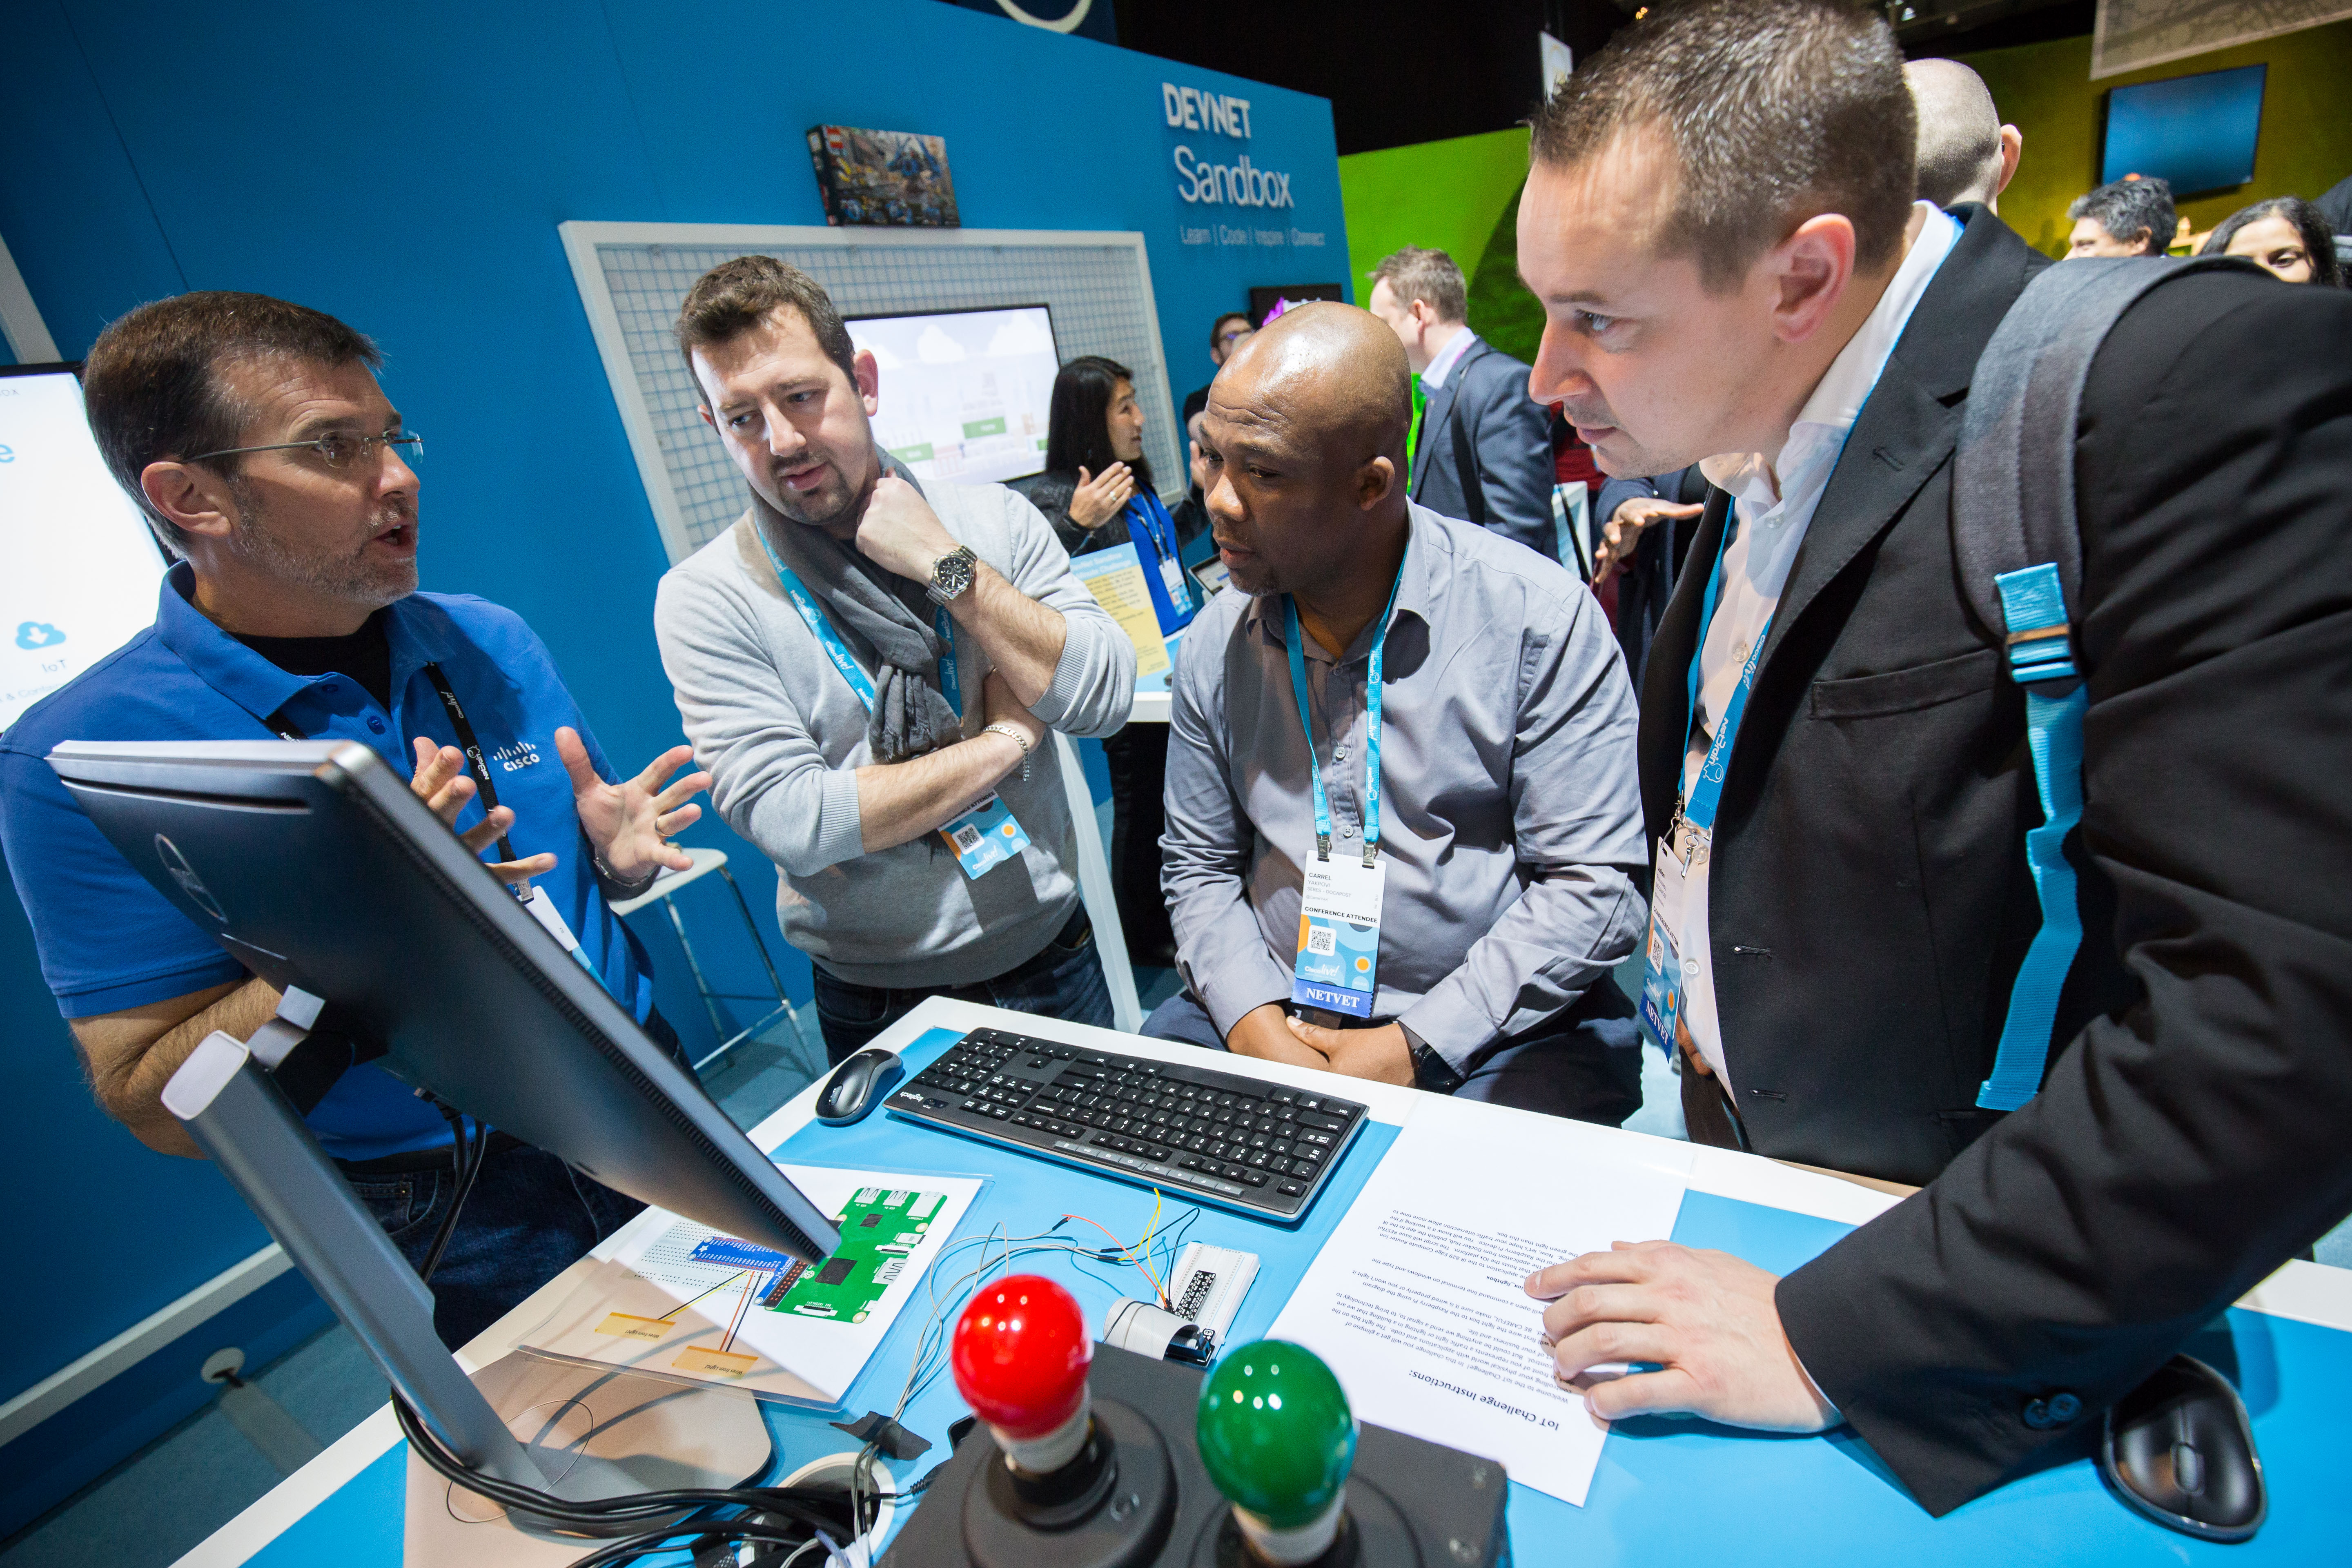 Learn About Stealthwatch in the DevNet Zone at CLUS